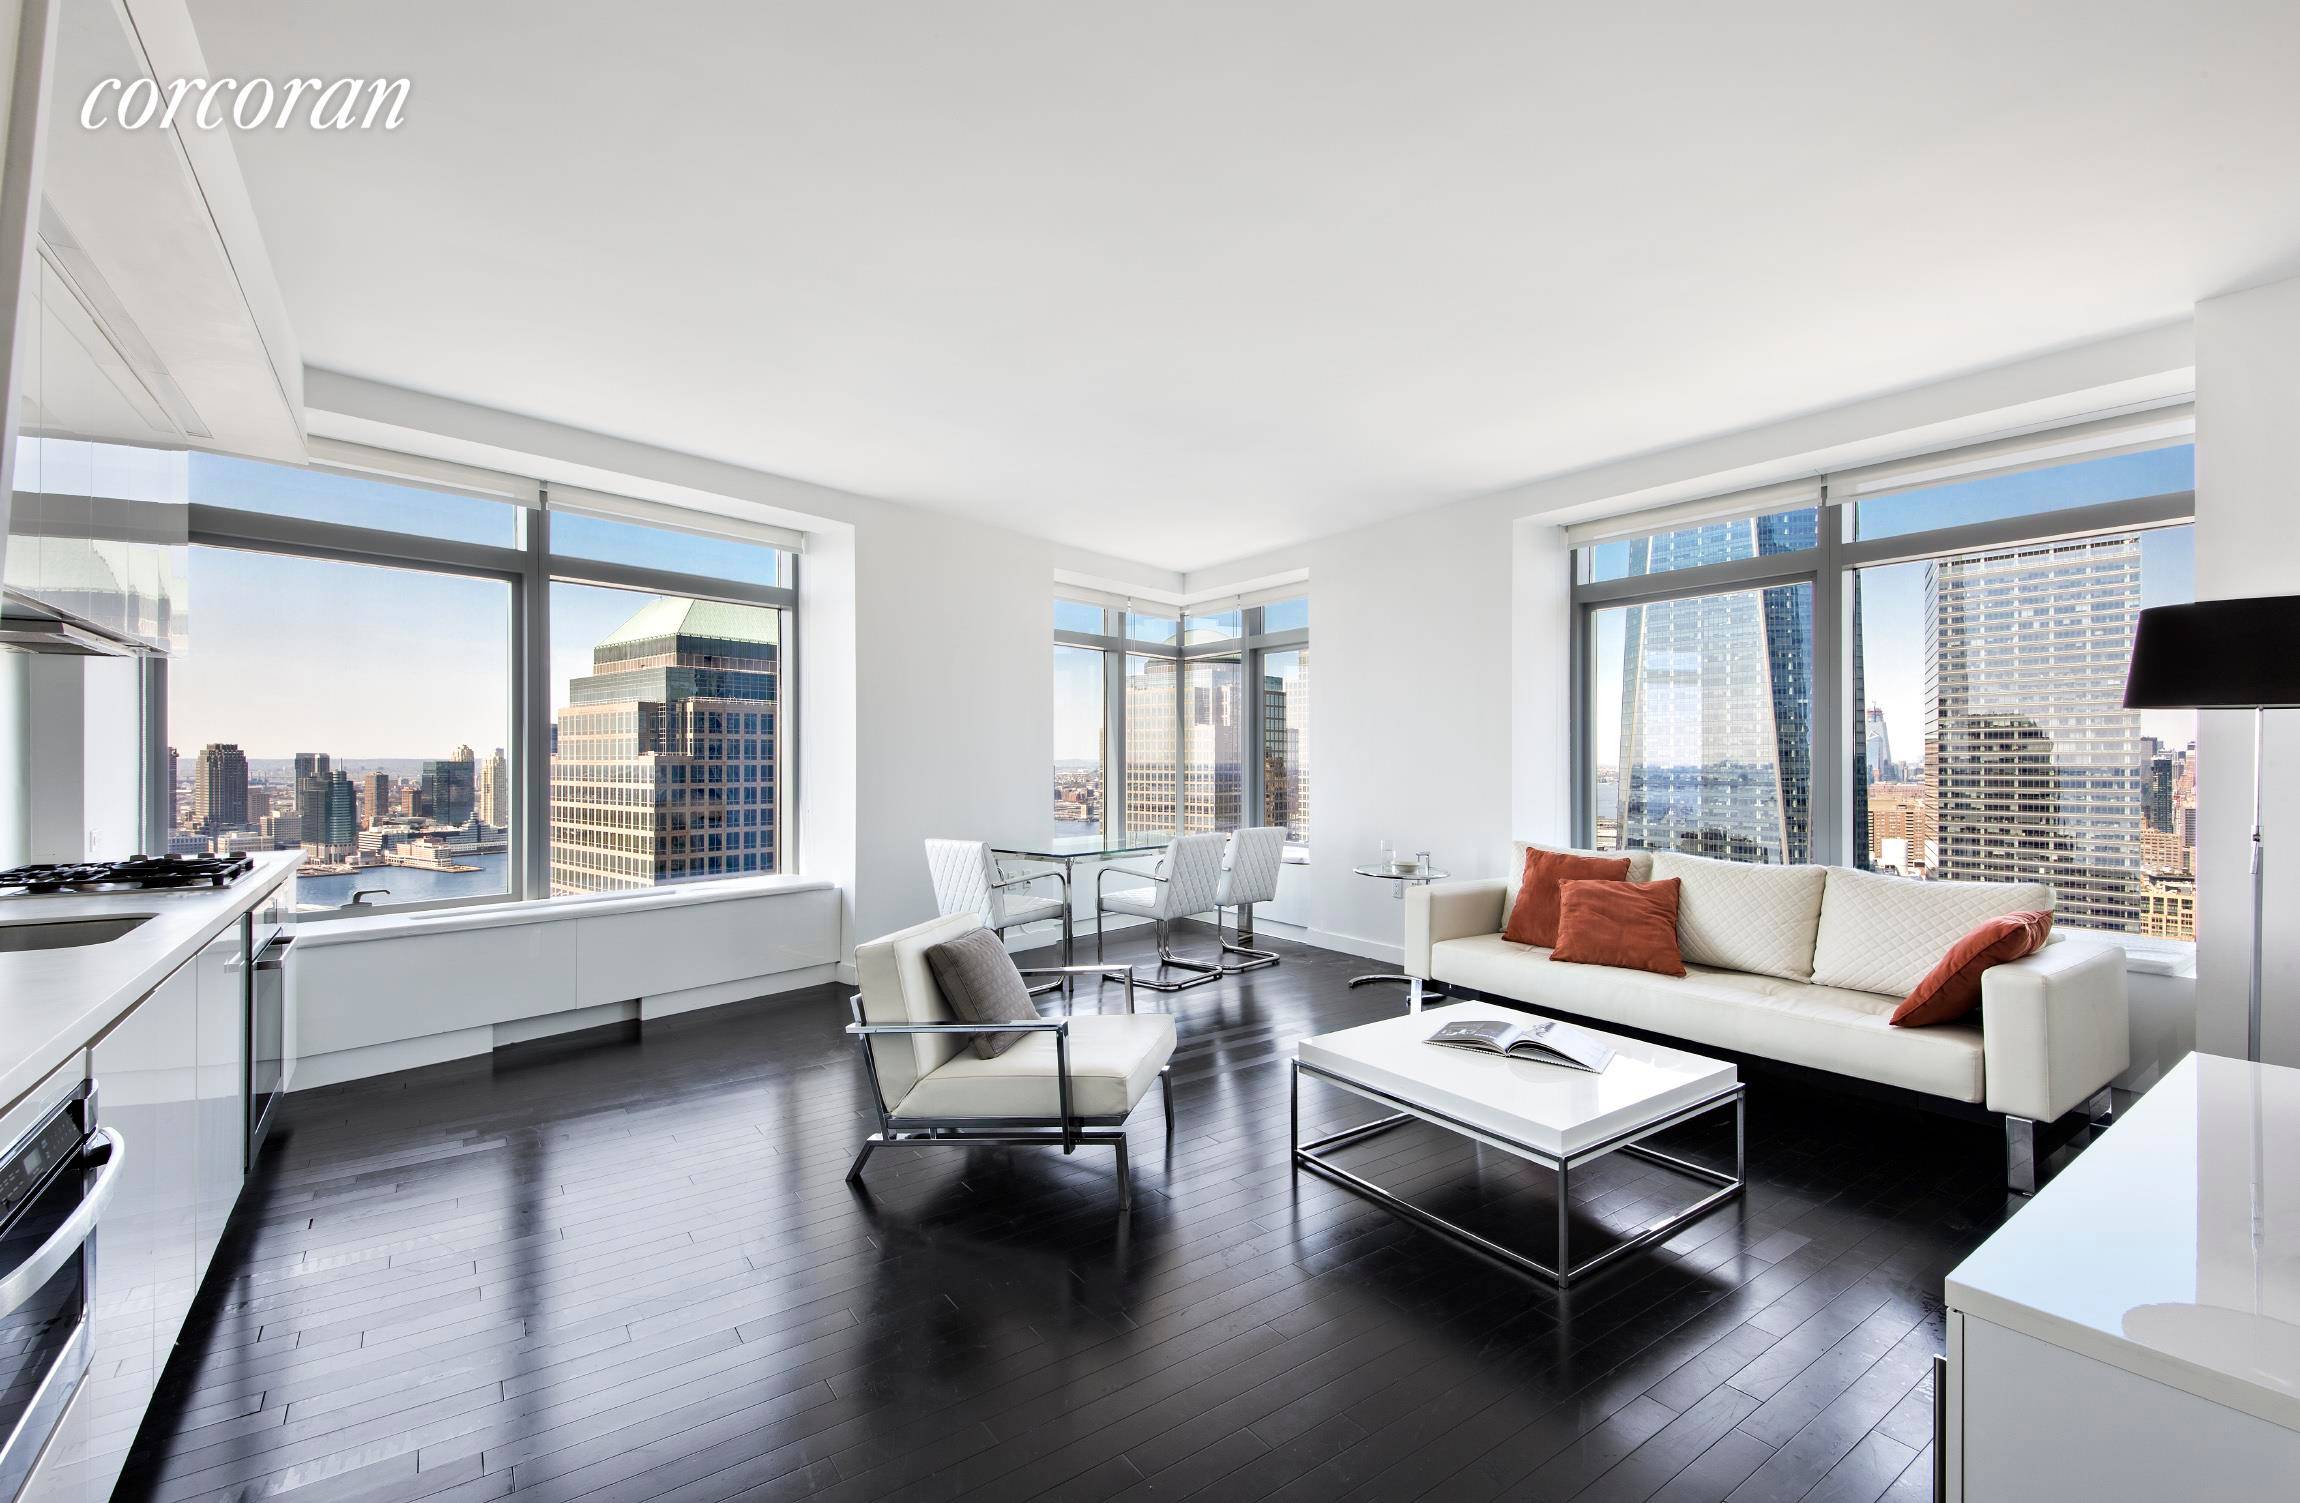 Welcome to the W New York Downtown Residences amp ; Hotels the best of both worlds.